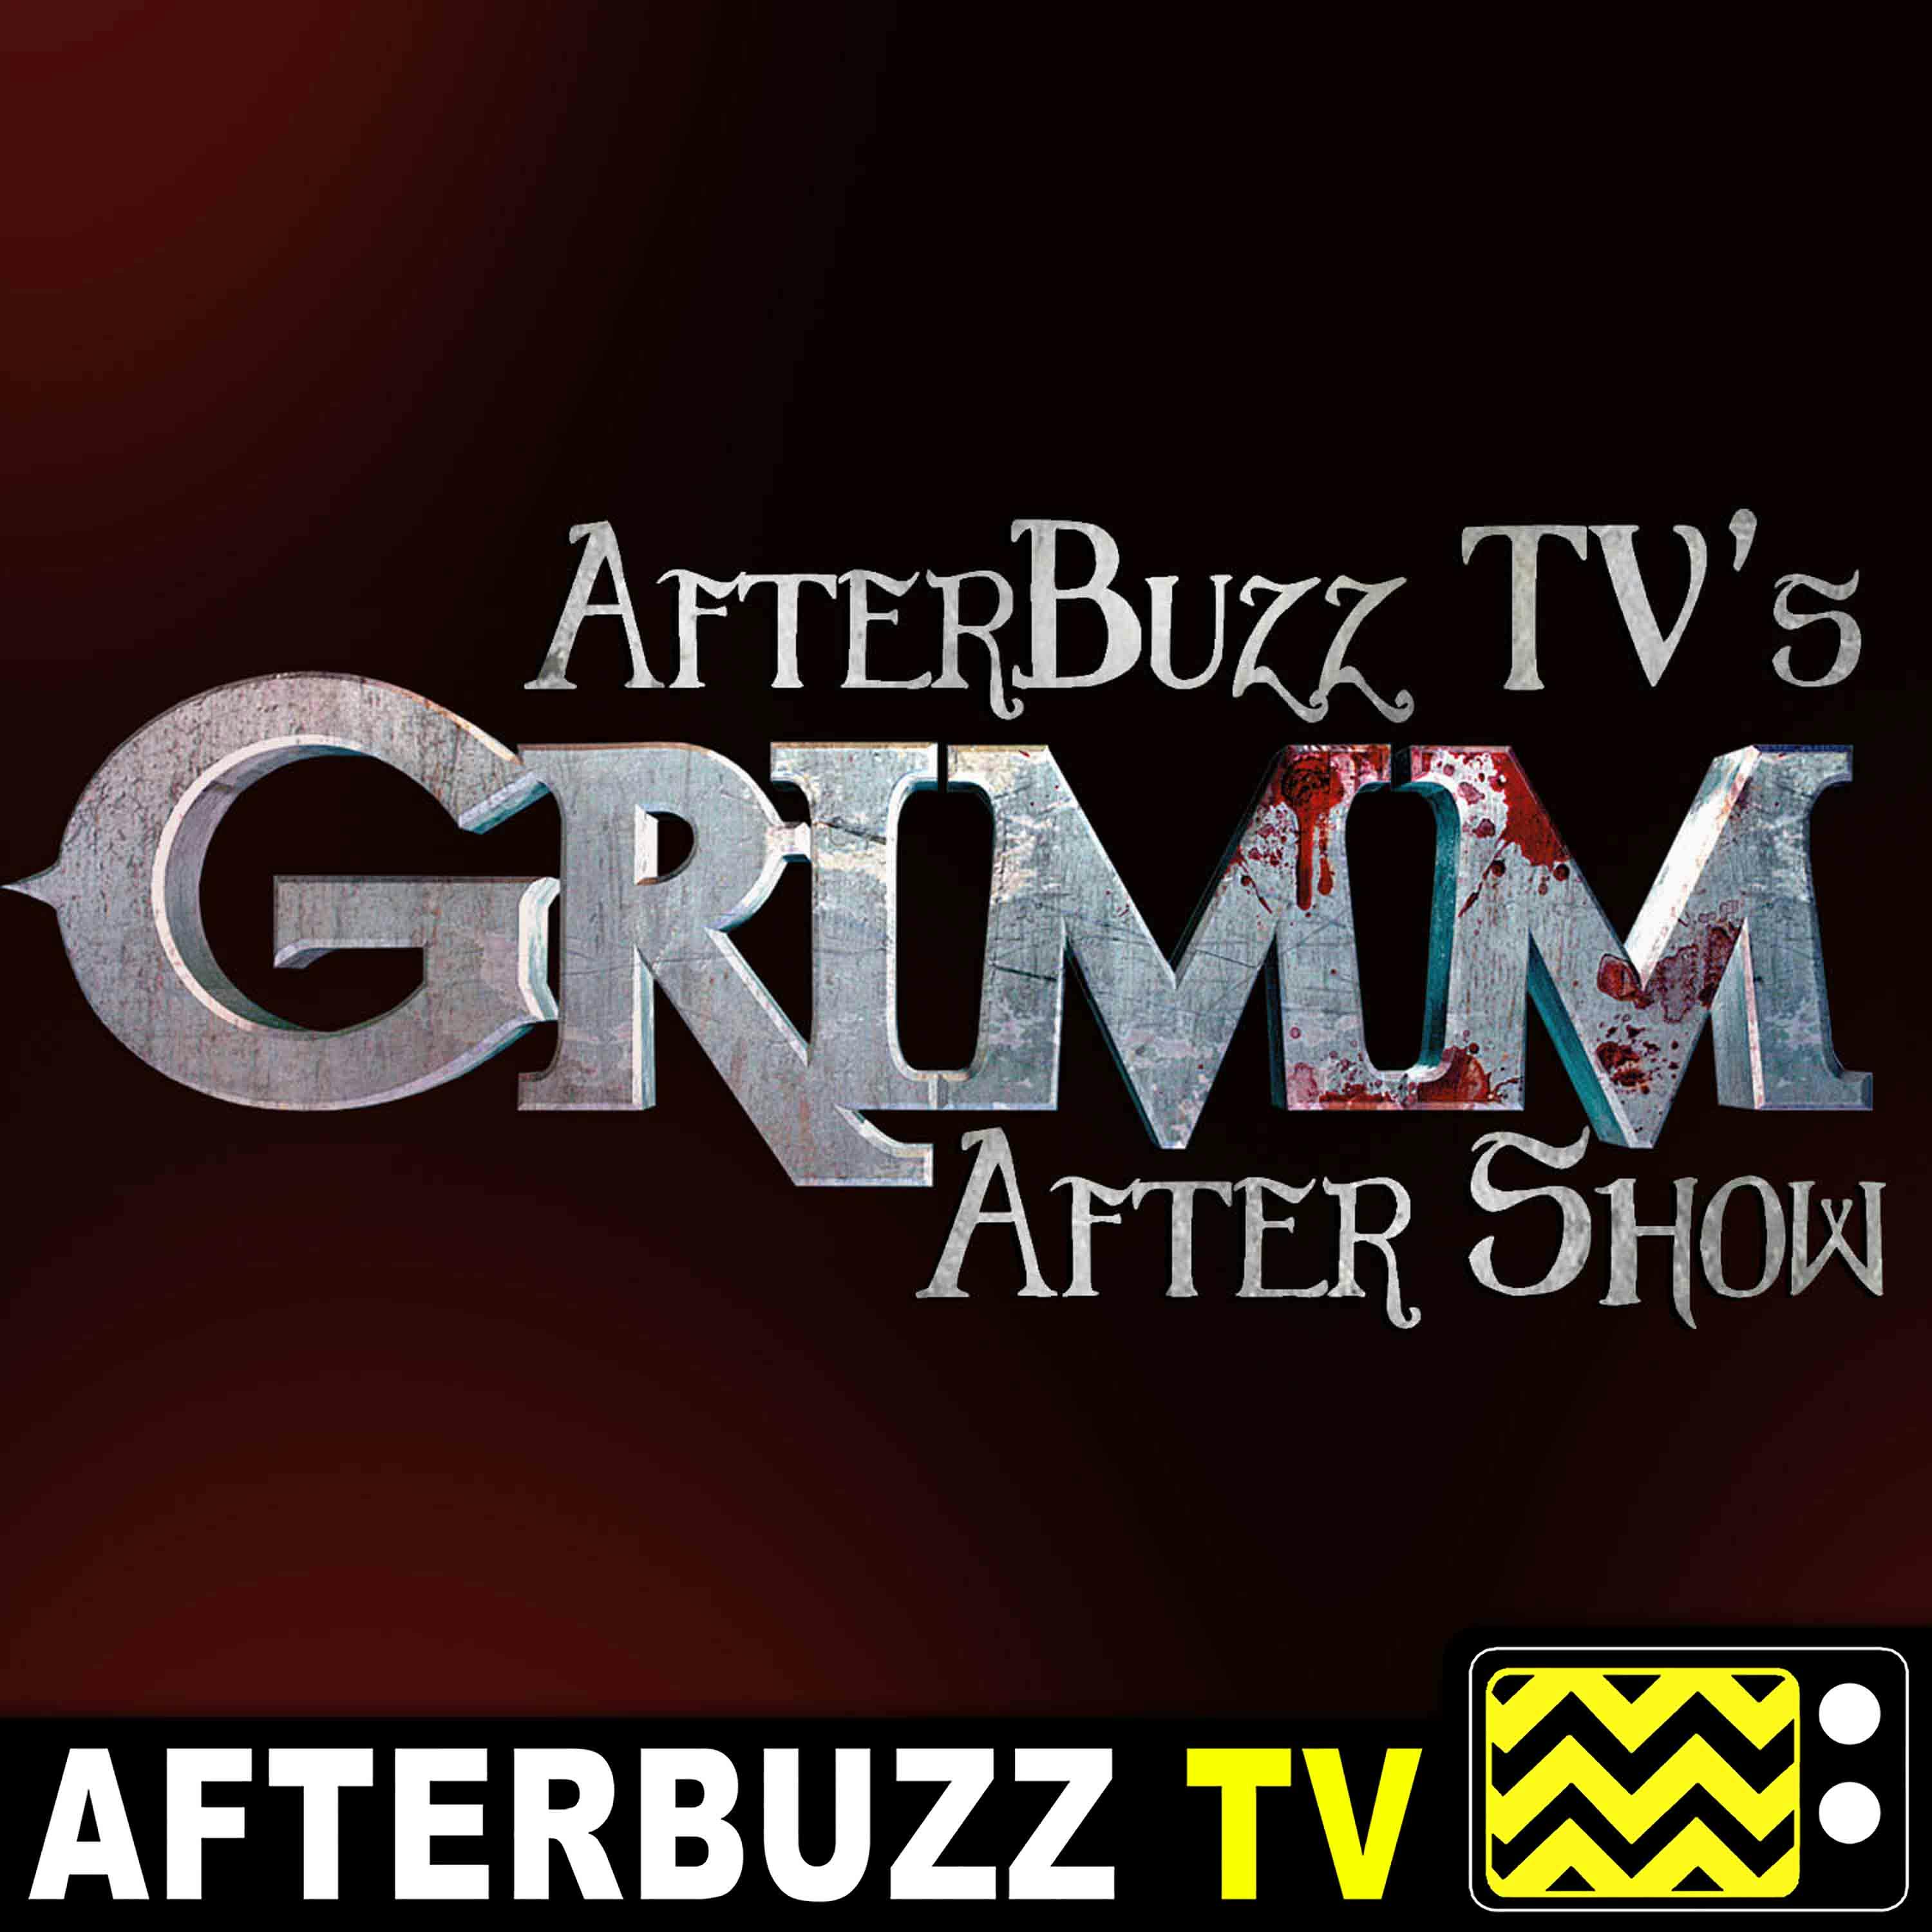 Grimm S:5 | Shaun Toub Guests on Bad Night E:20 | AfterBuzz TV AfterShow